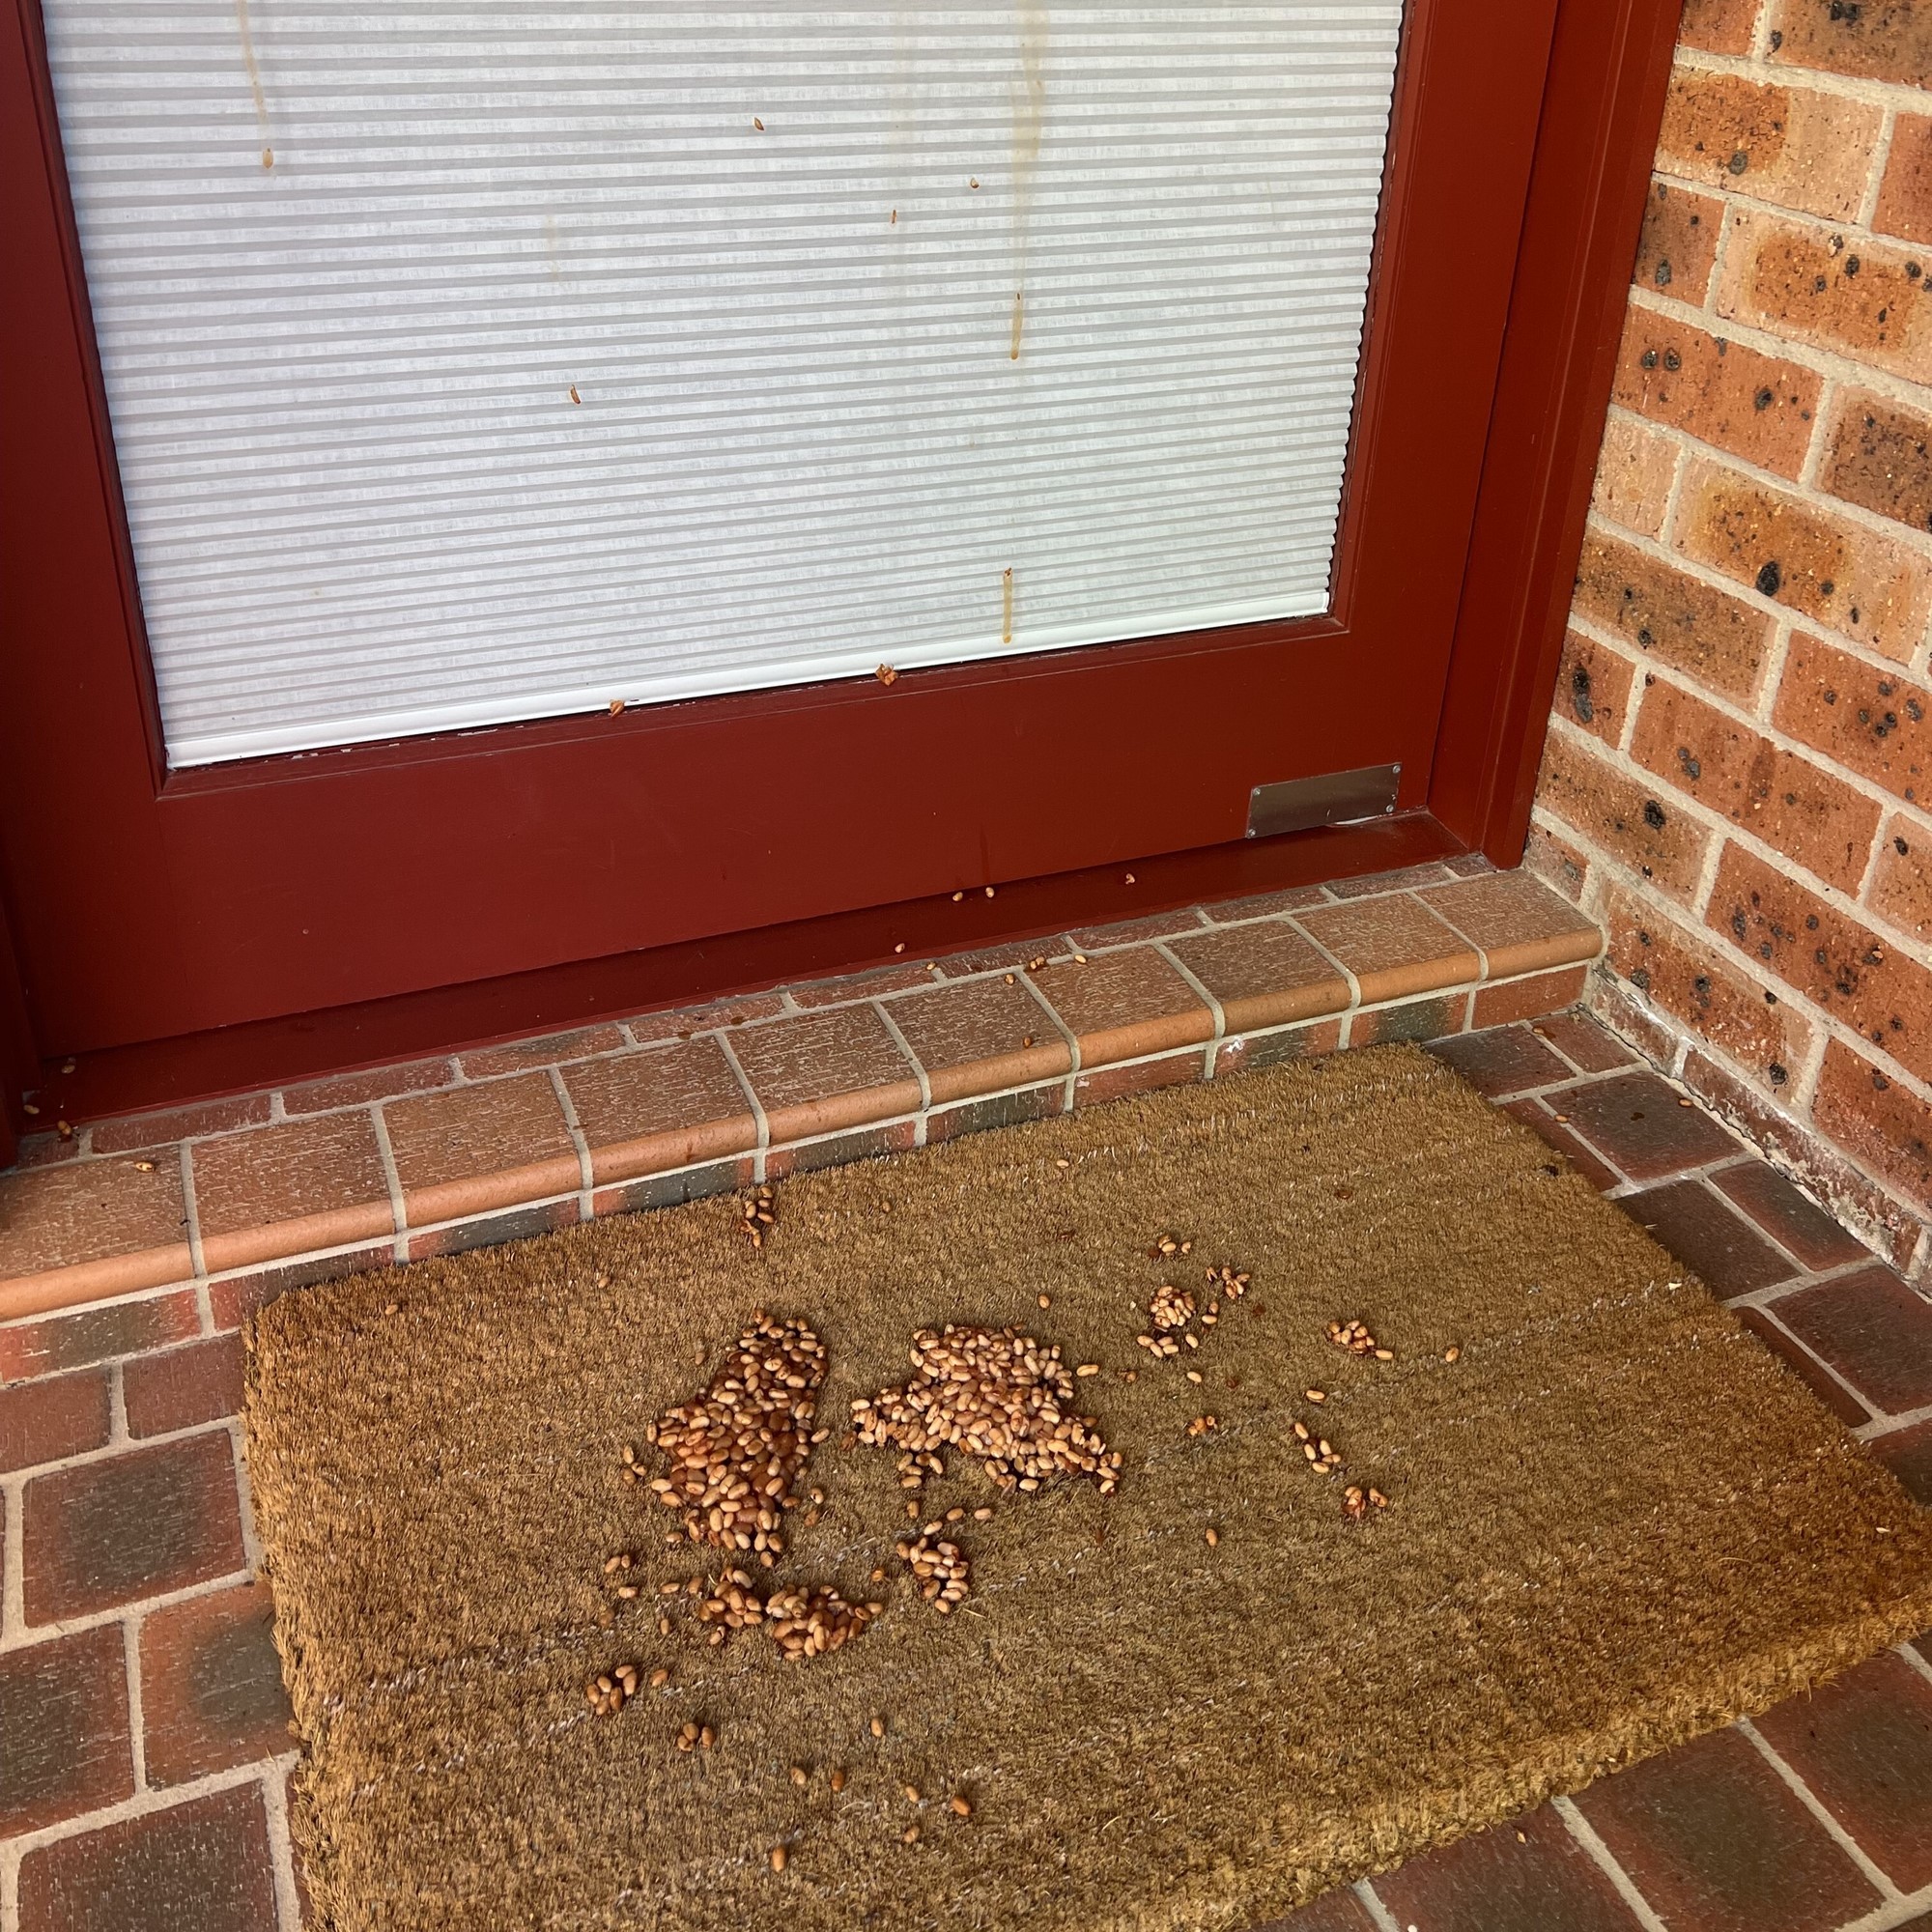 Loose baked beans lay on a door mat after slide down a glass front door.